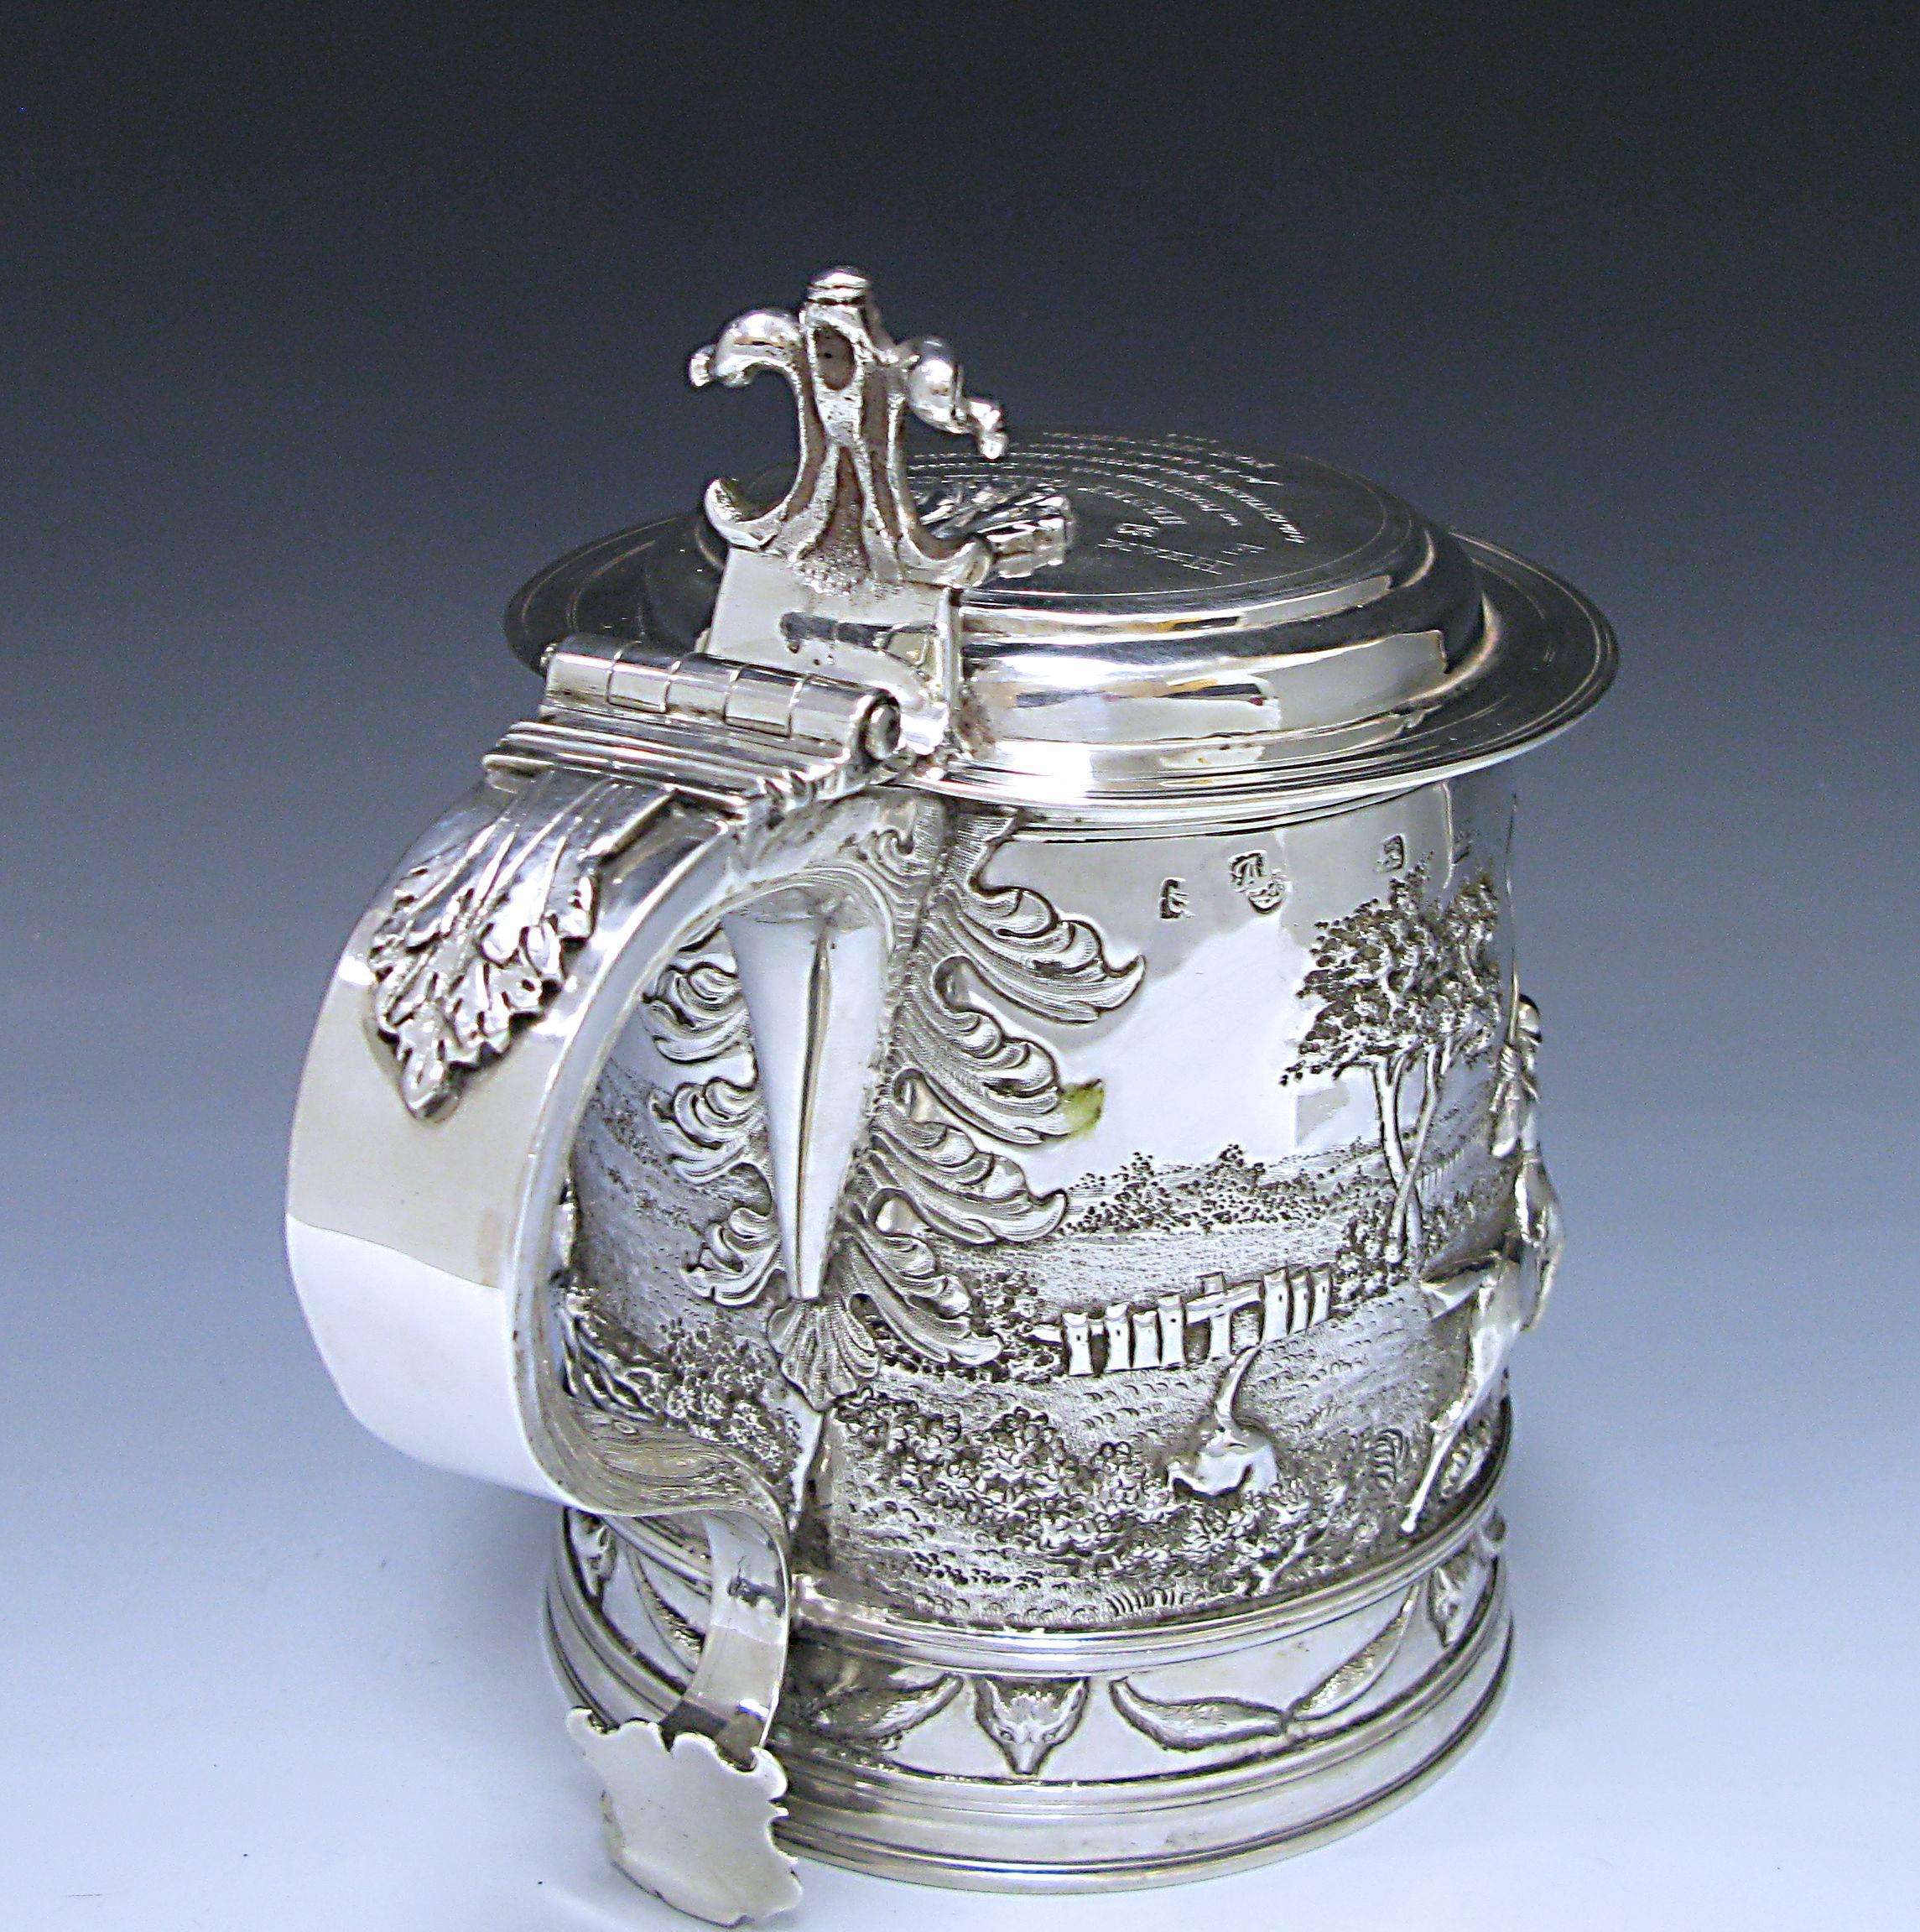 A magnificent James II antique silver lidded Tankard made in 1687. The makers mark is that of I A Monogram of London (see Jacksons page 135). The tankard was later chased in 1842 when it presented to Henry Garlick, by the gentlemen of the Duke of